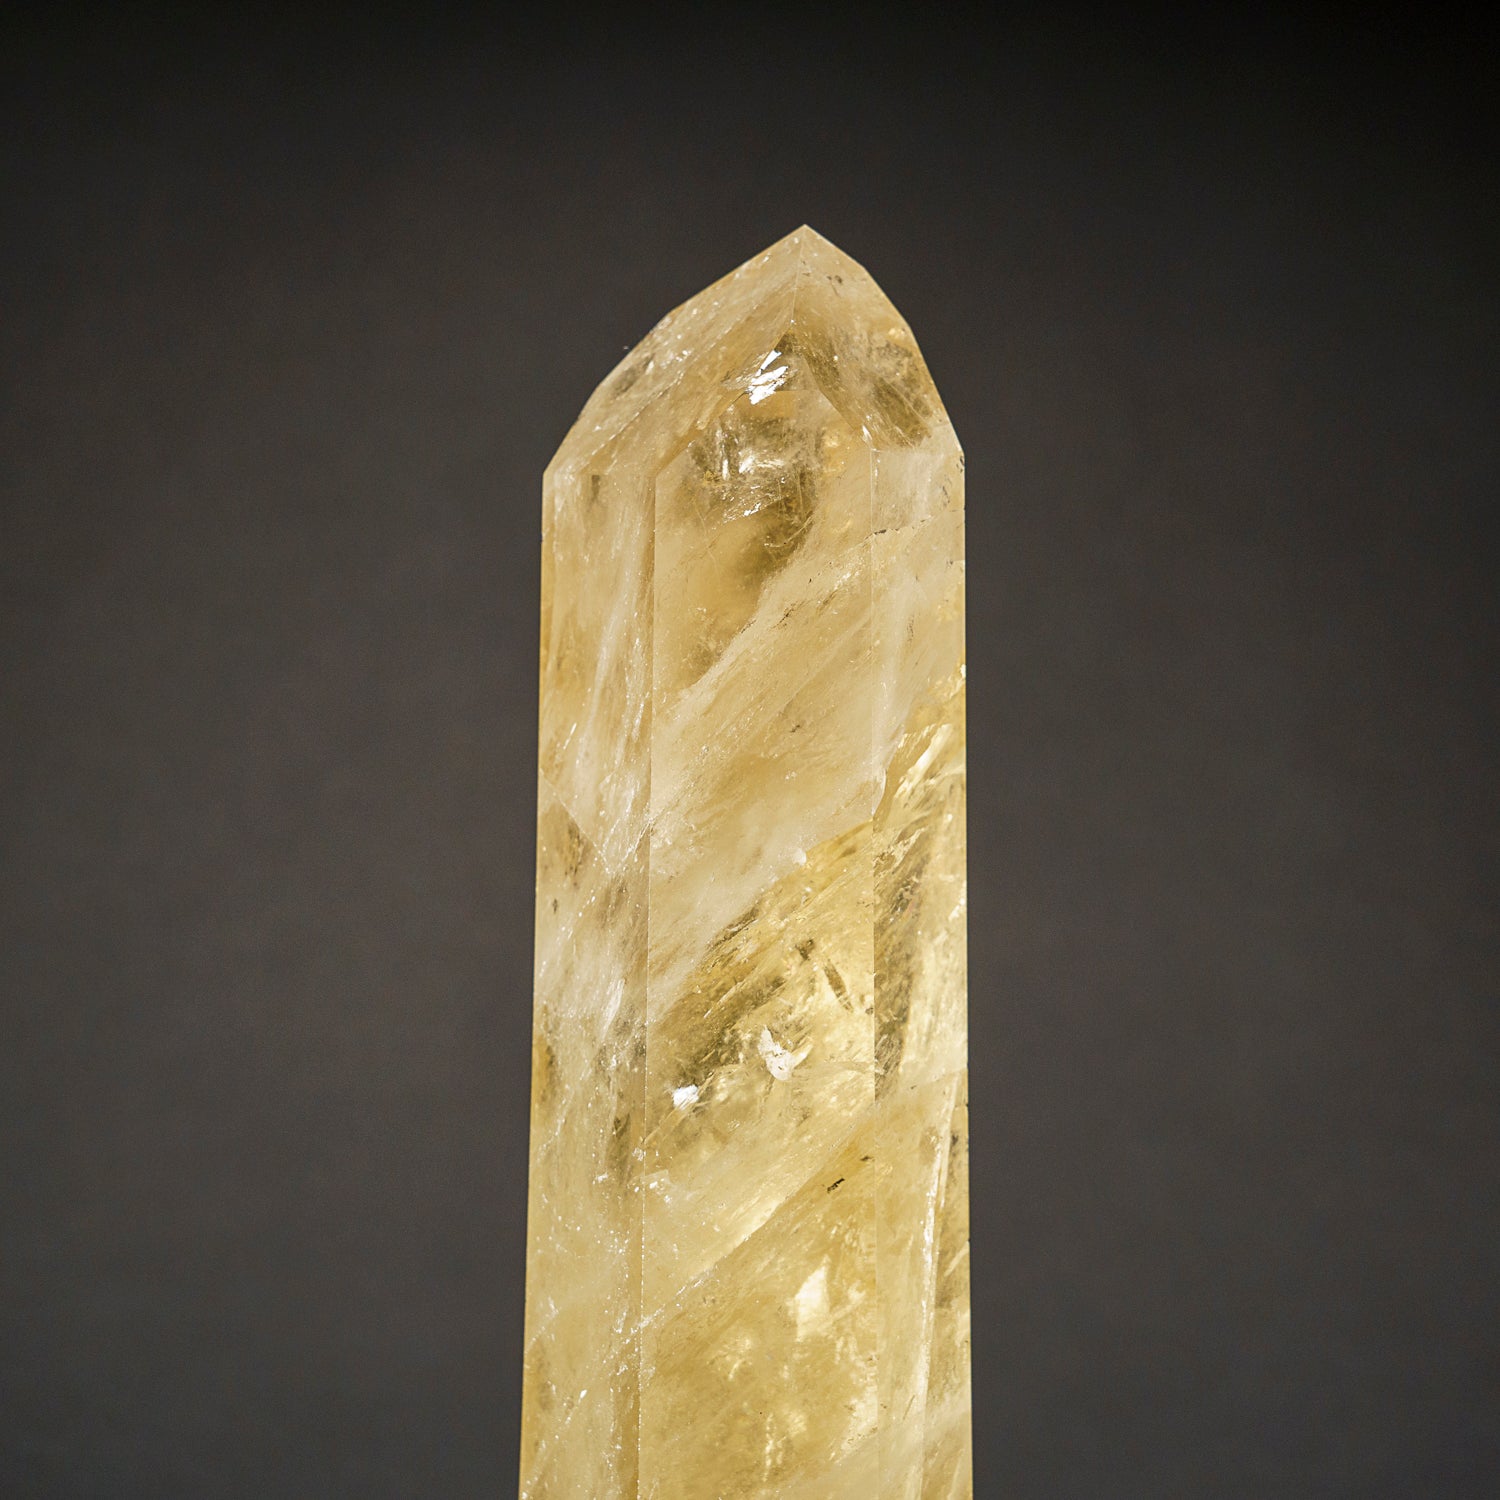 Genuine polished Citrine Crystal Point from Brazil (5.5 lbs)